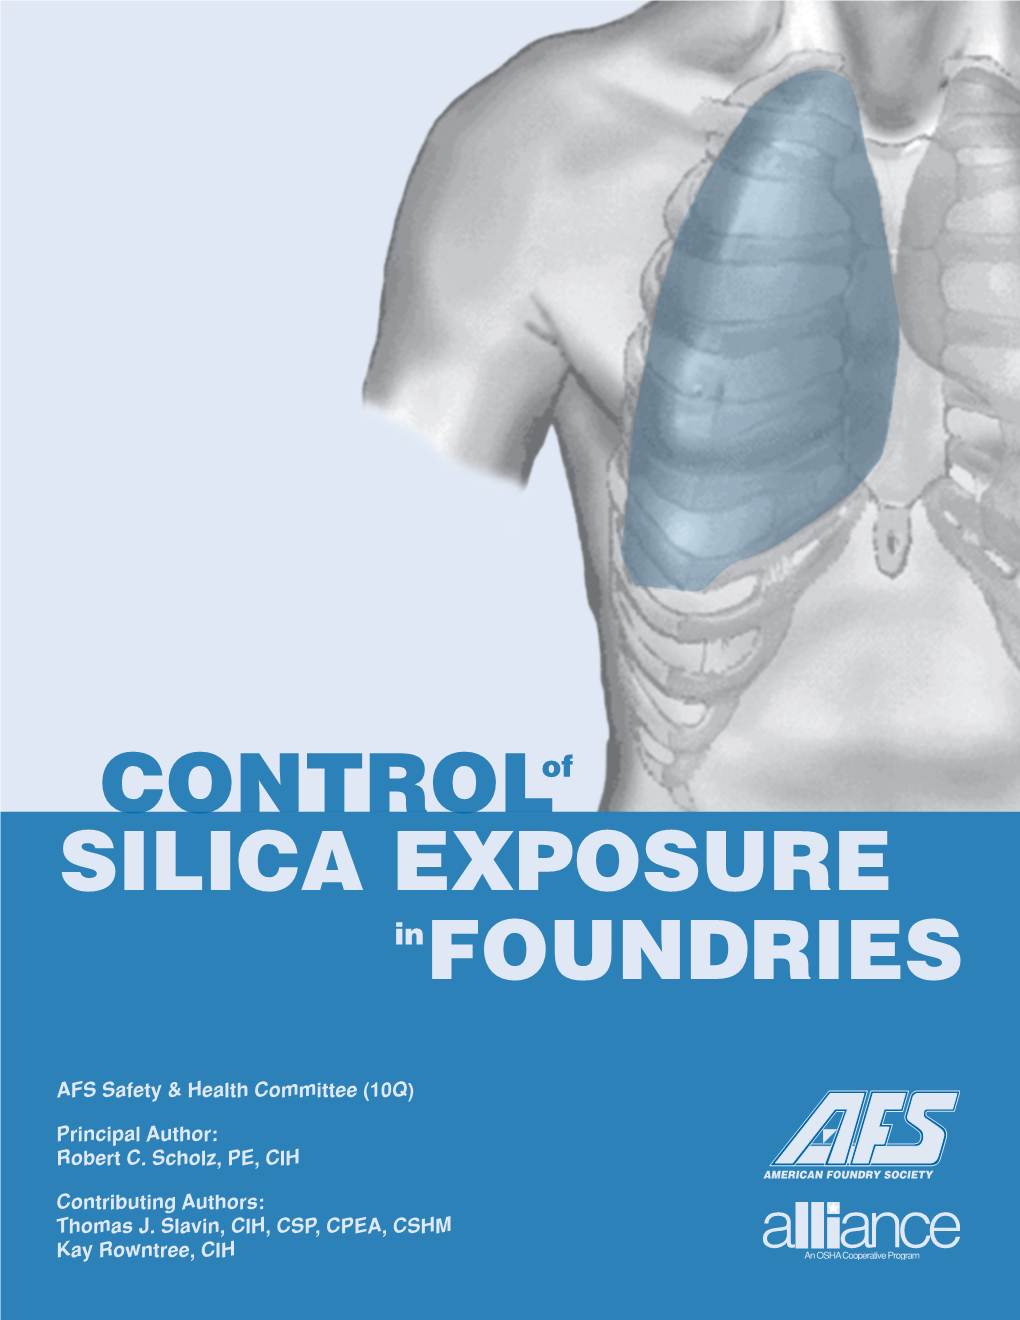 Control of Silica Exposure in Foundries